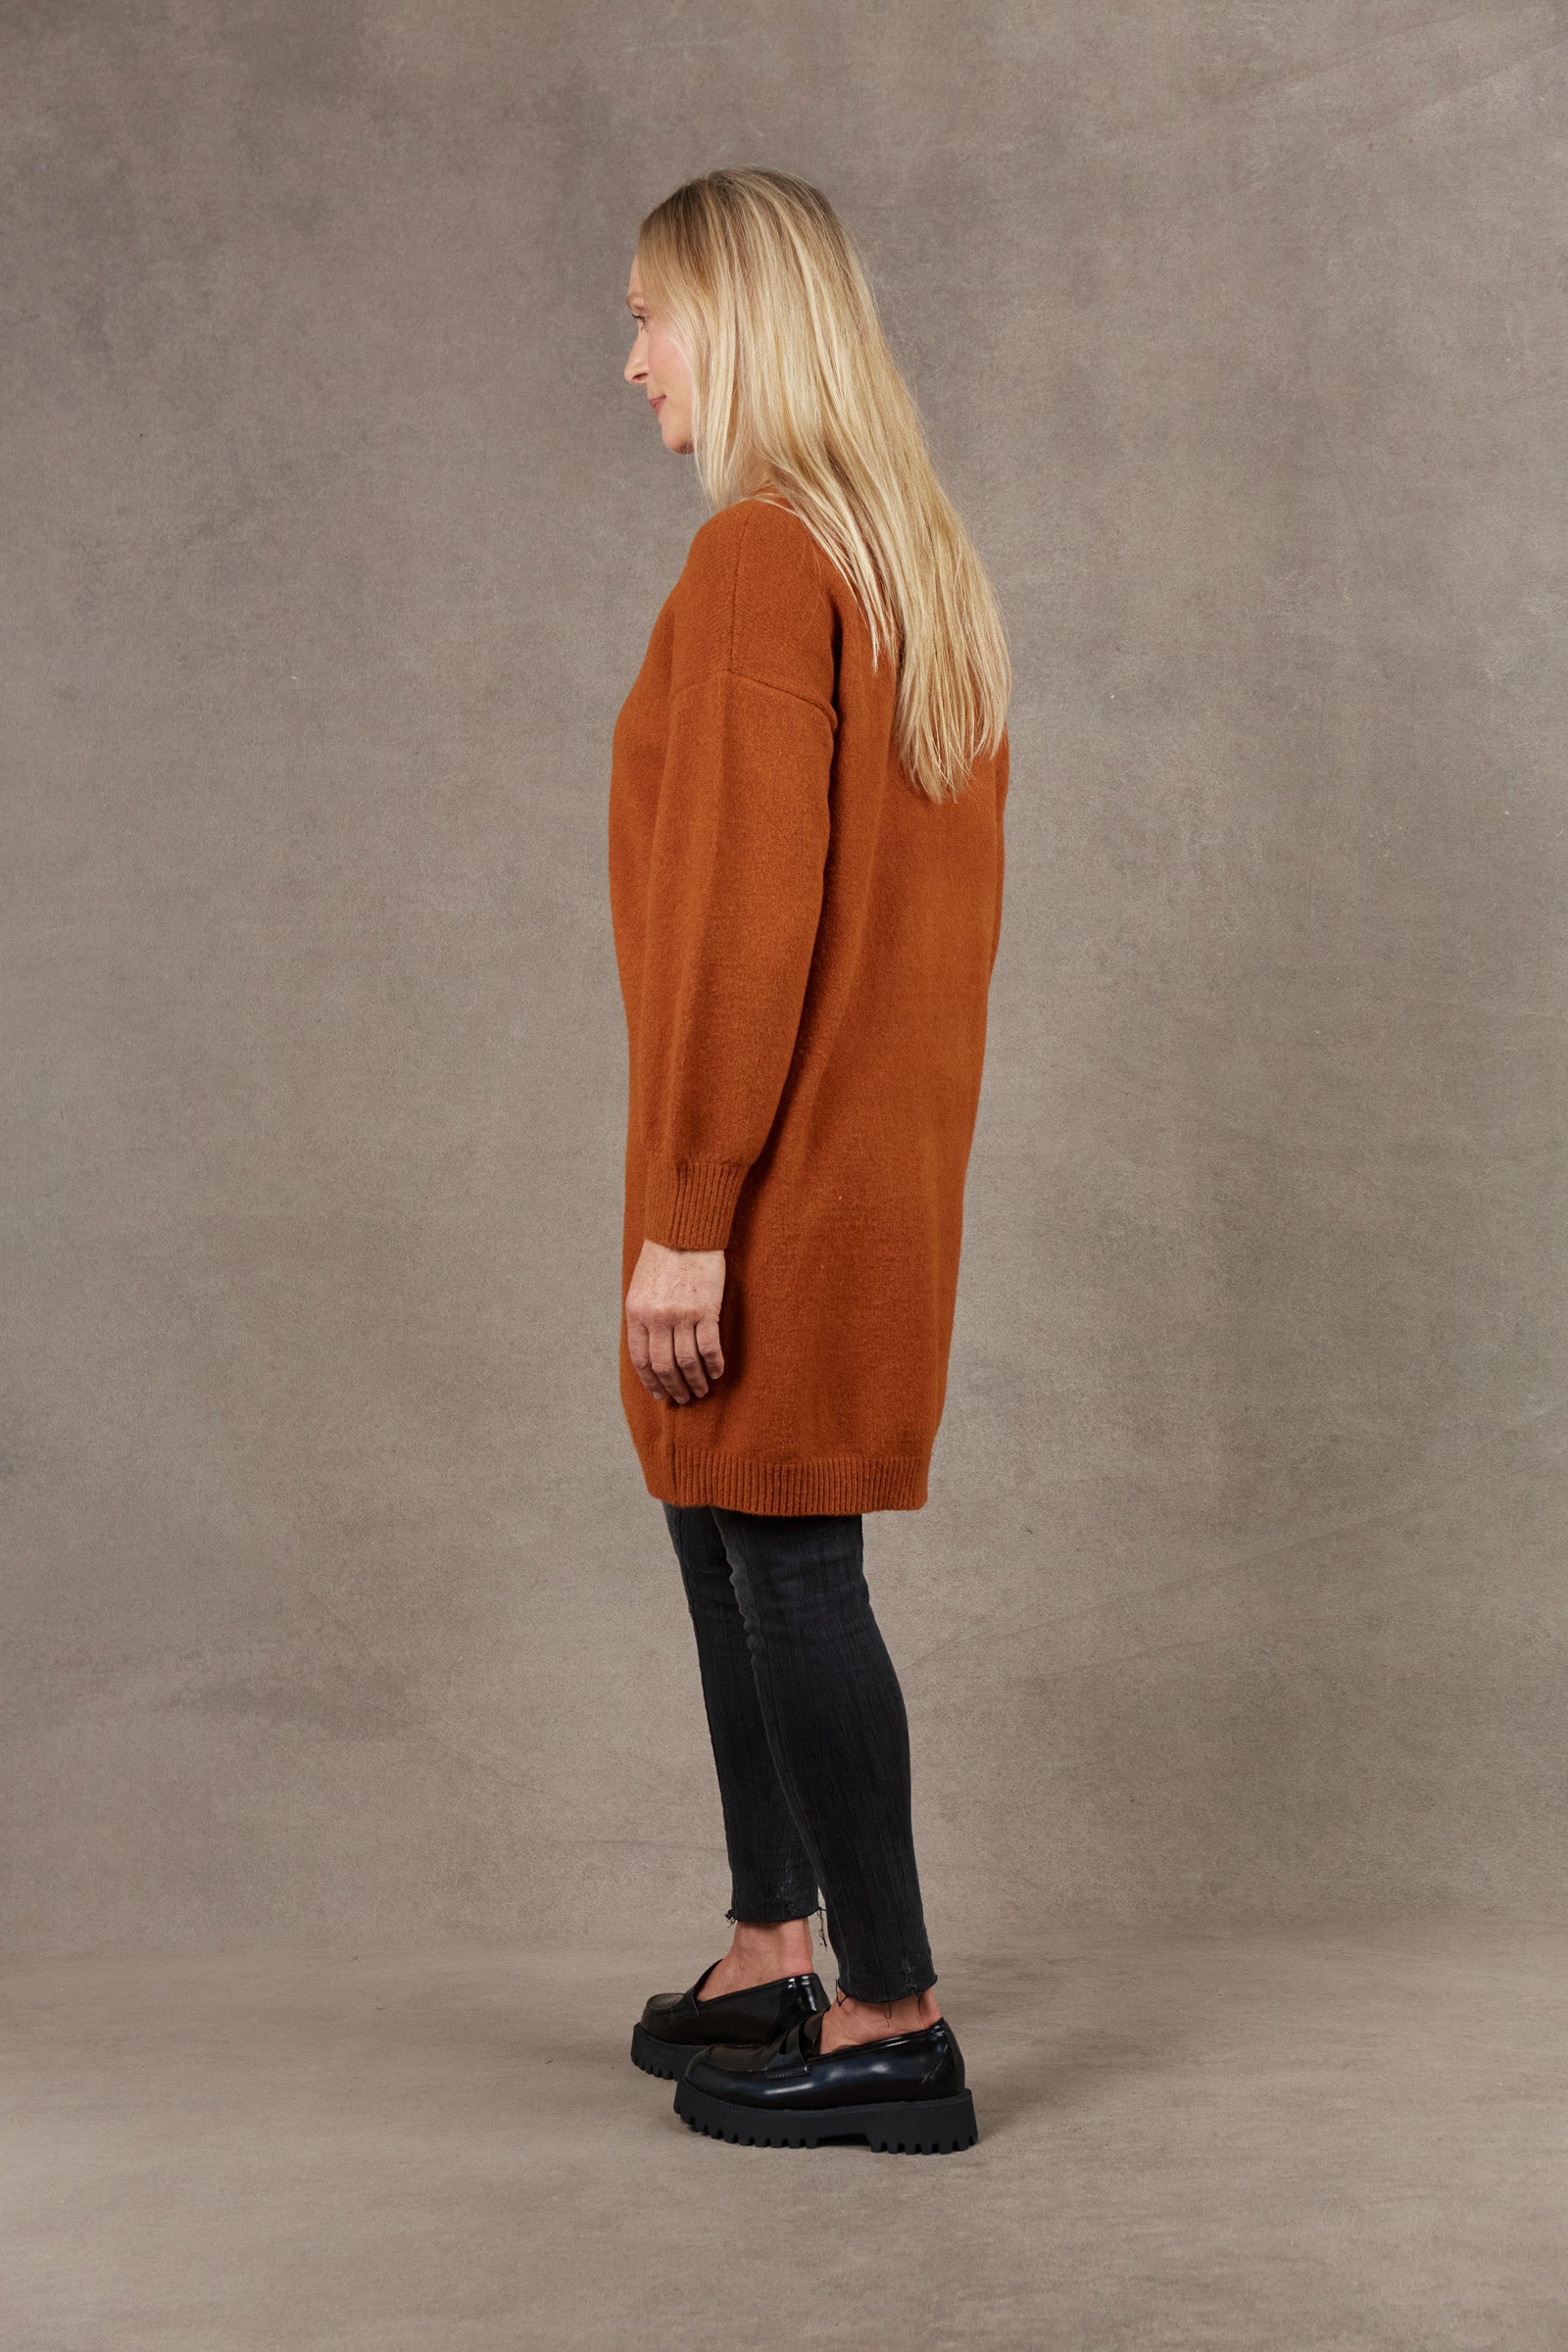 Paarl Midi Knit - Ochre - eb&ive Clothing - Knit Jumper One Size